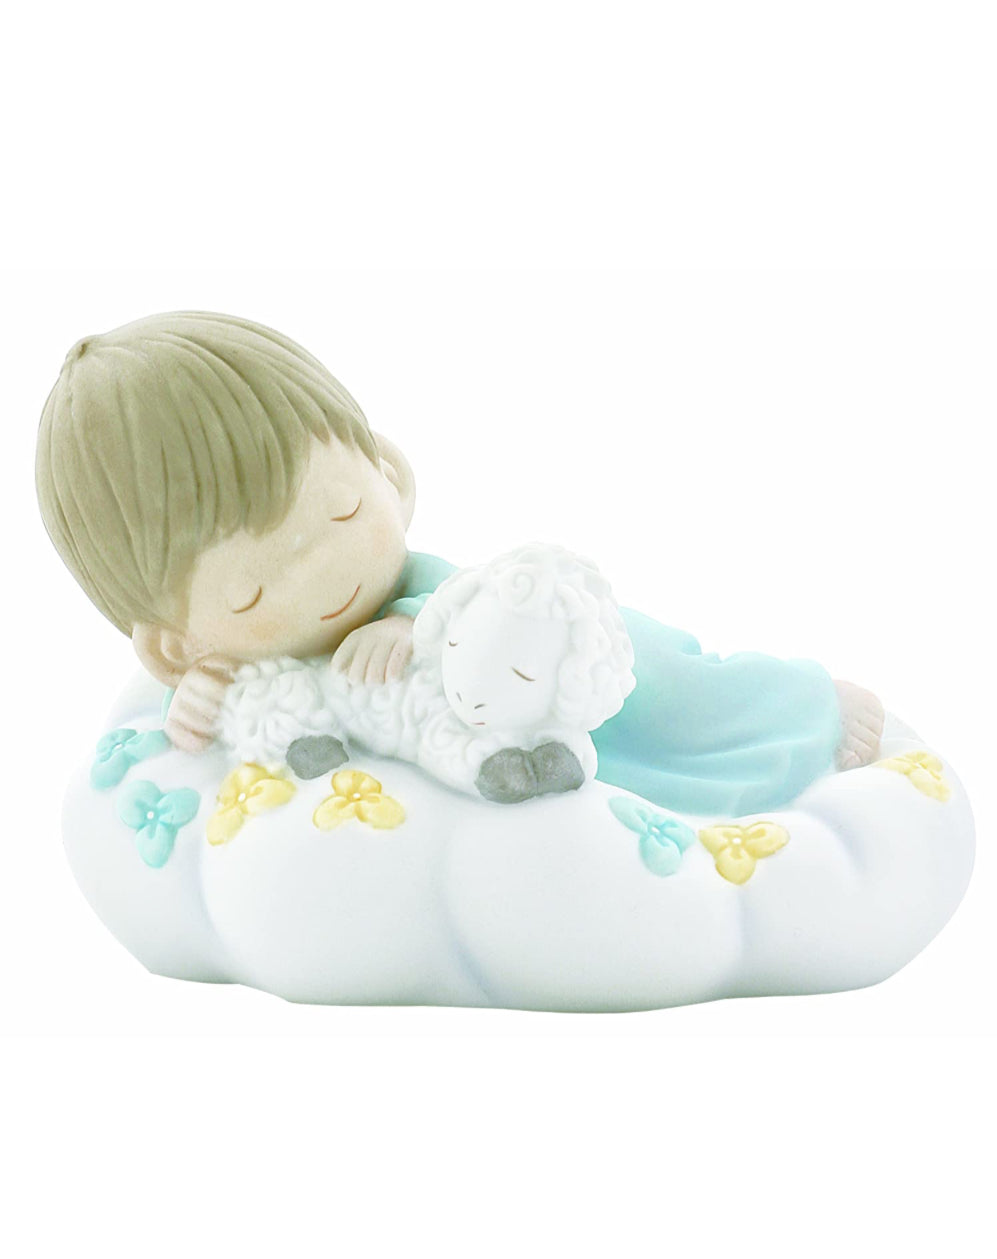 Forever Embraced In God's Warm Love - Precious Moment Figurine